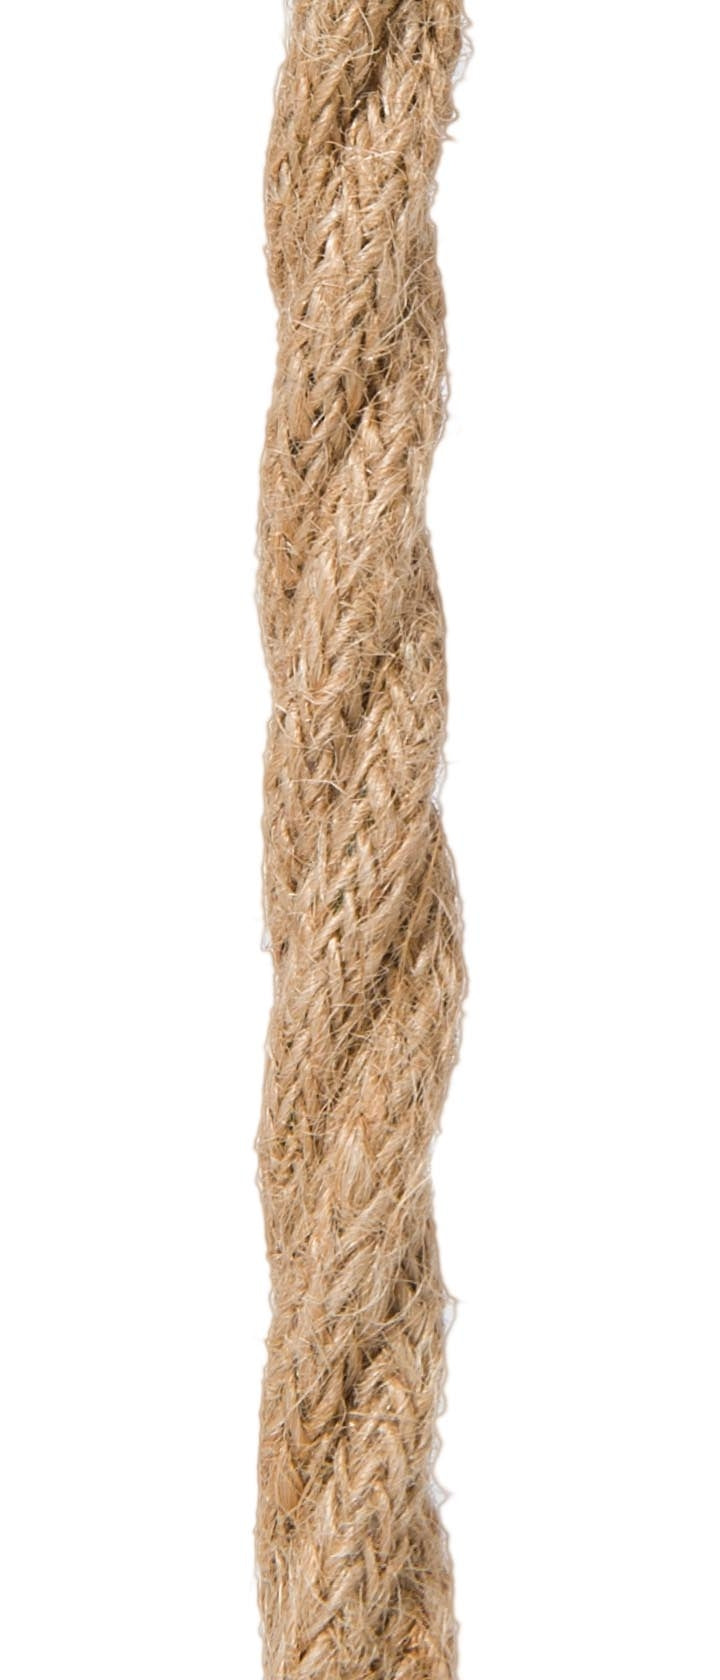 Jute Burlap Twisted Lamp Cord, 3-Wire